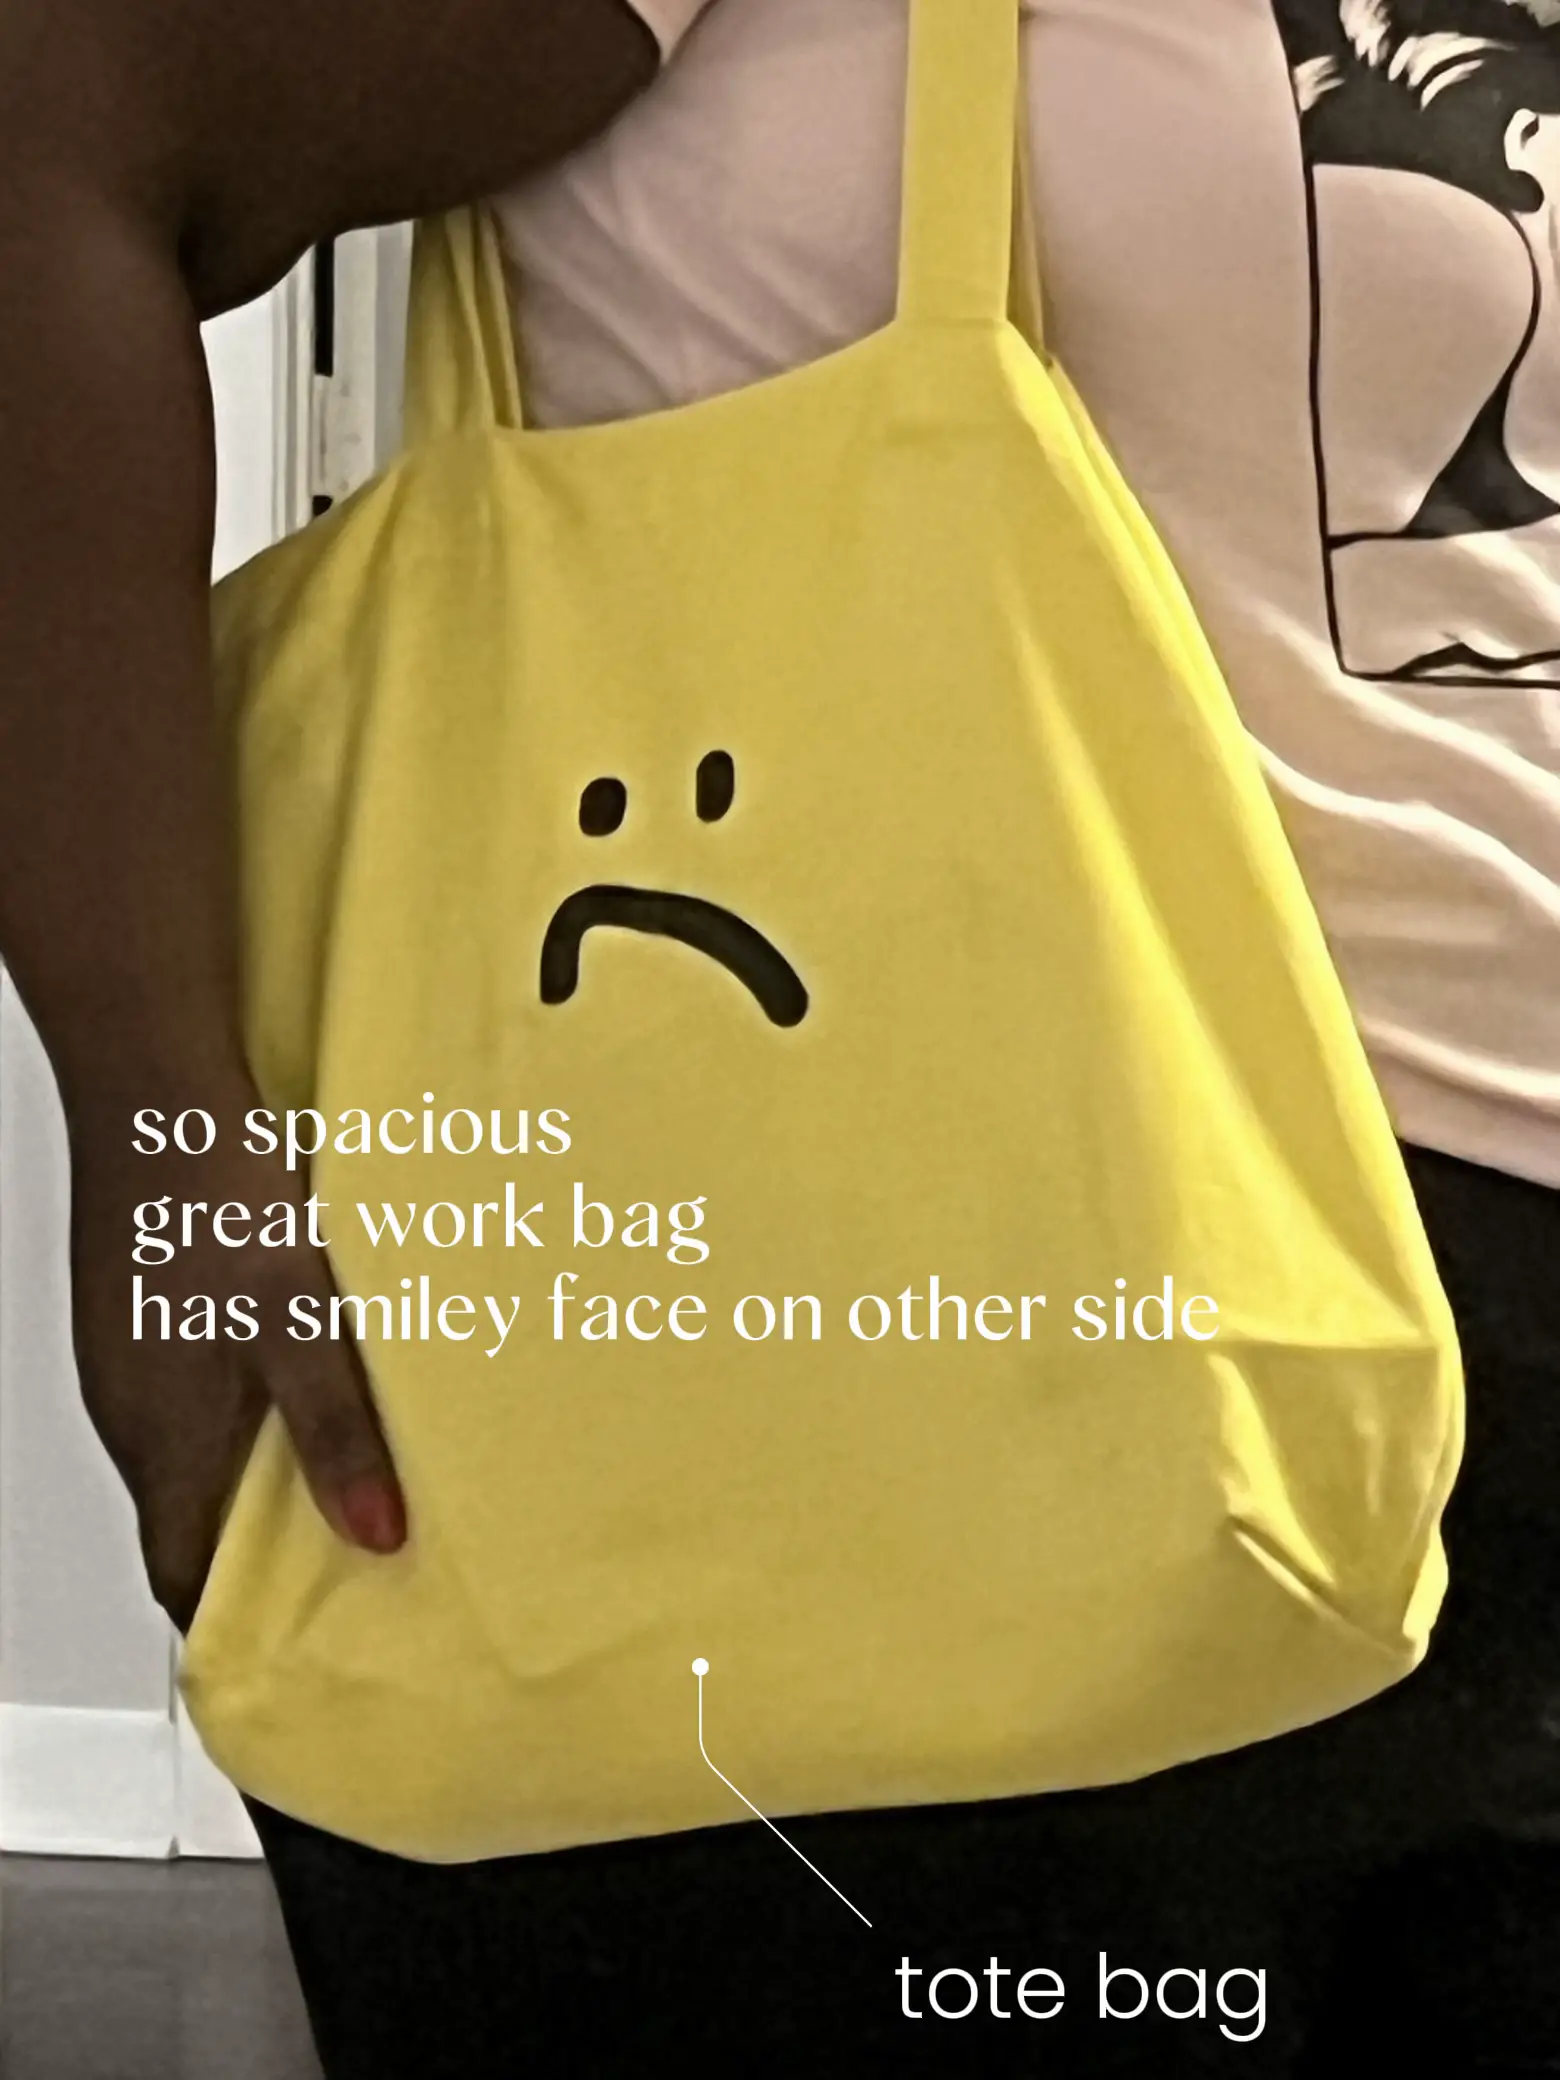  A person is holding a yellow tote bag with a smiley face on it.